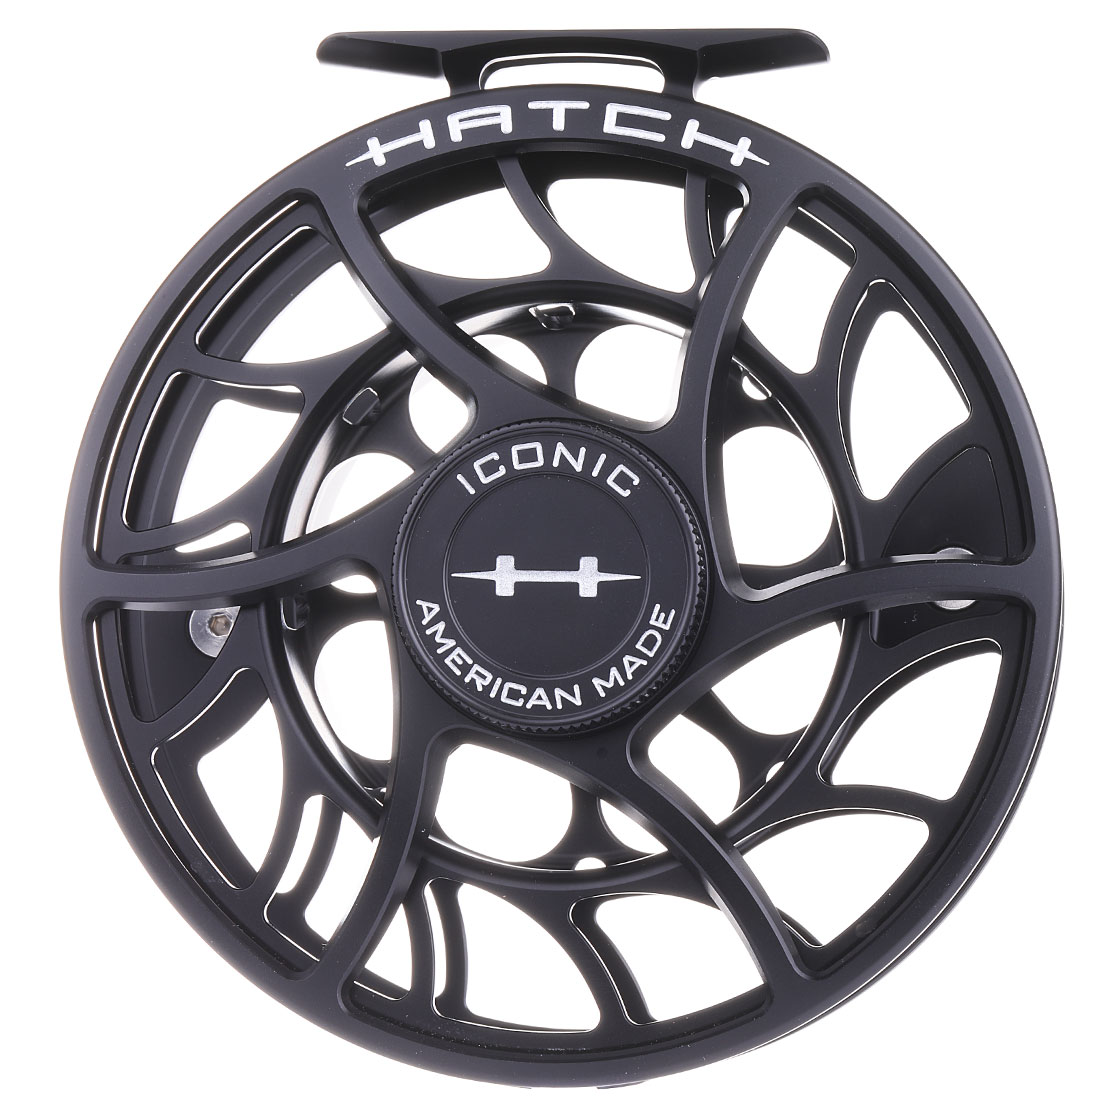 Hatch Iconic 7 Plus Fly Reel Mid Arbor / Black/Silver